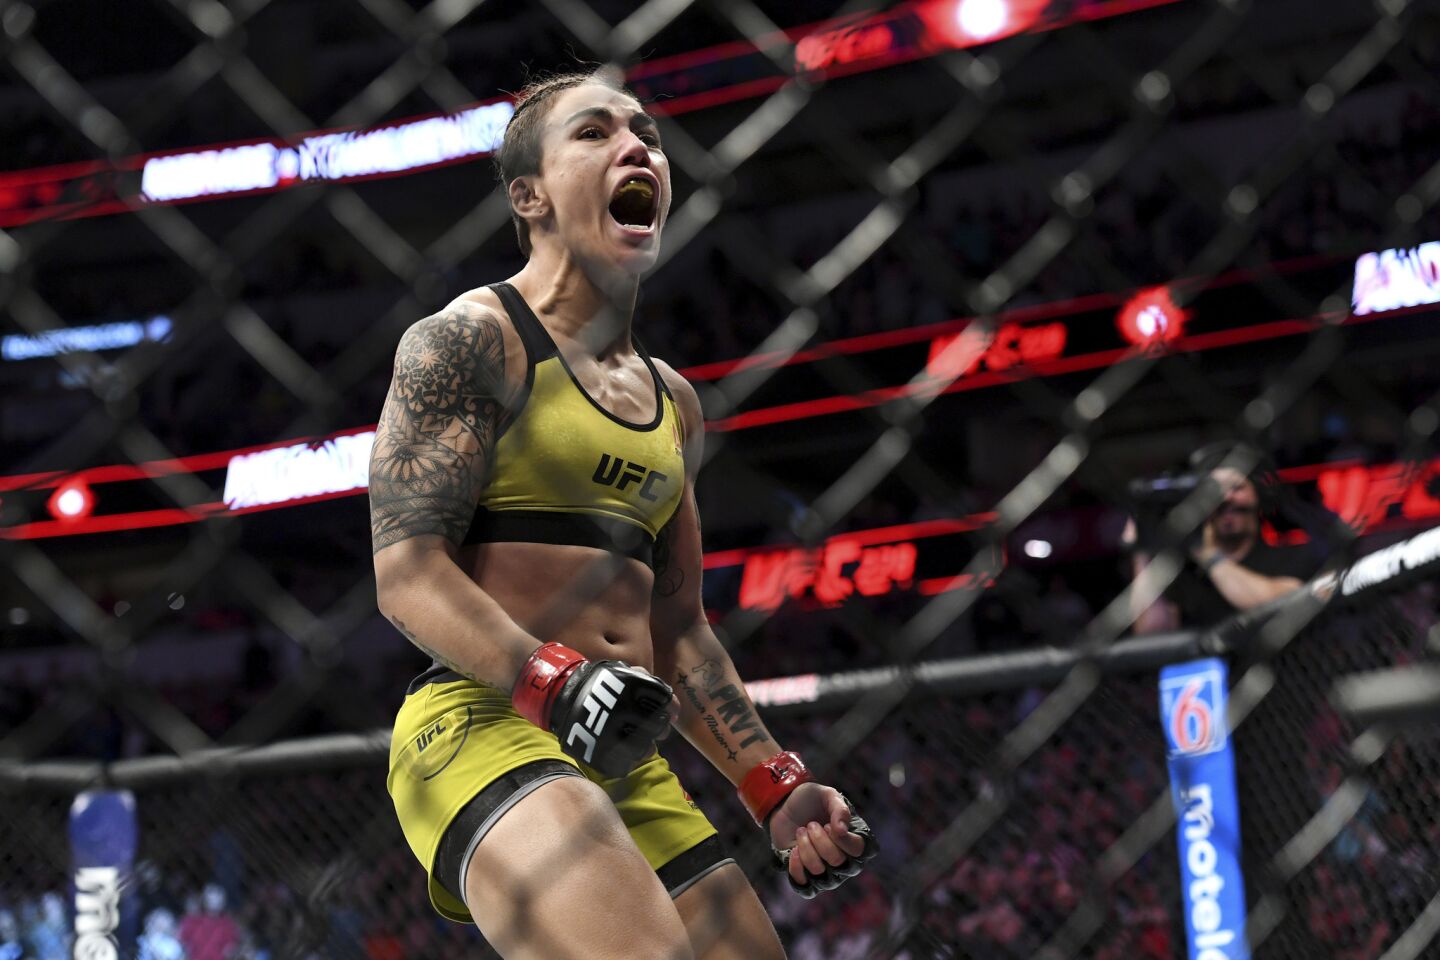 Jessica Andrade celebrates after knocking out Karolina Kowalkiewicz during their strawweight title mixed martial arts bout at UFC 228 on Saturday, Sept. 8, 2018, in Dallas. (AP Photo/Jeffrey McWhorter)